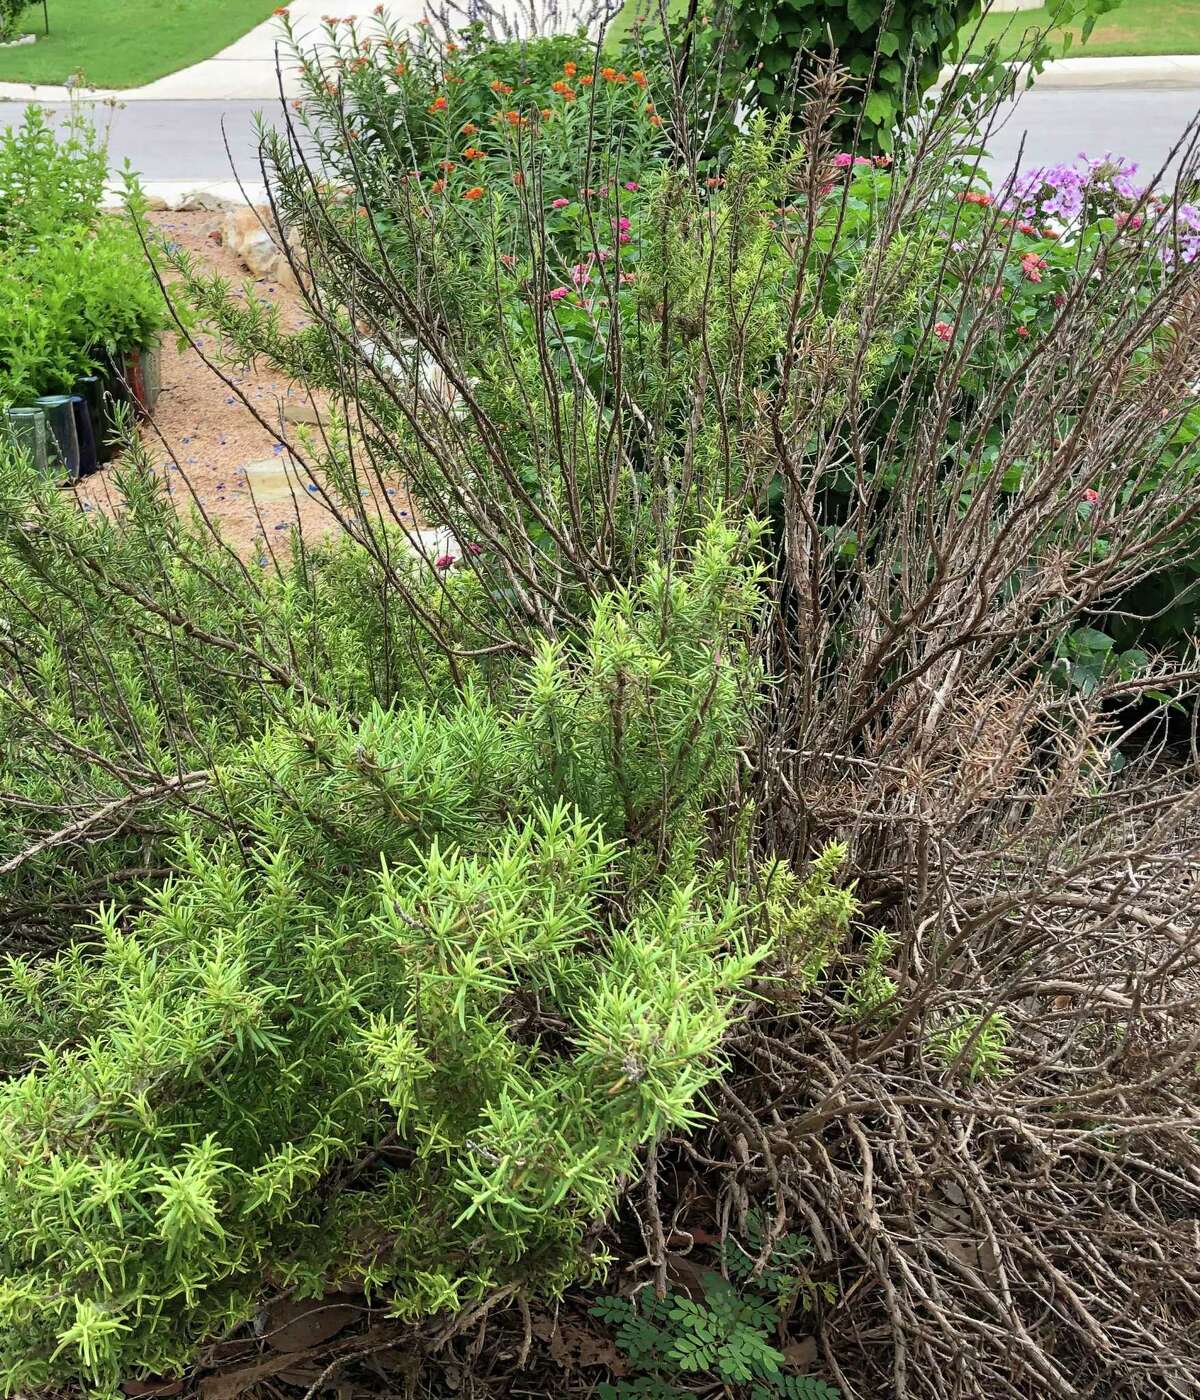 The freeze-damaged parts of this rosemary should be cut out.